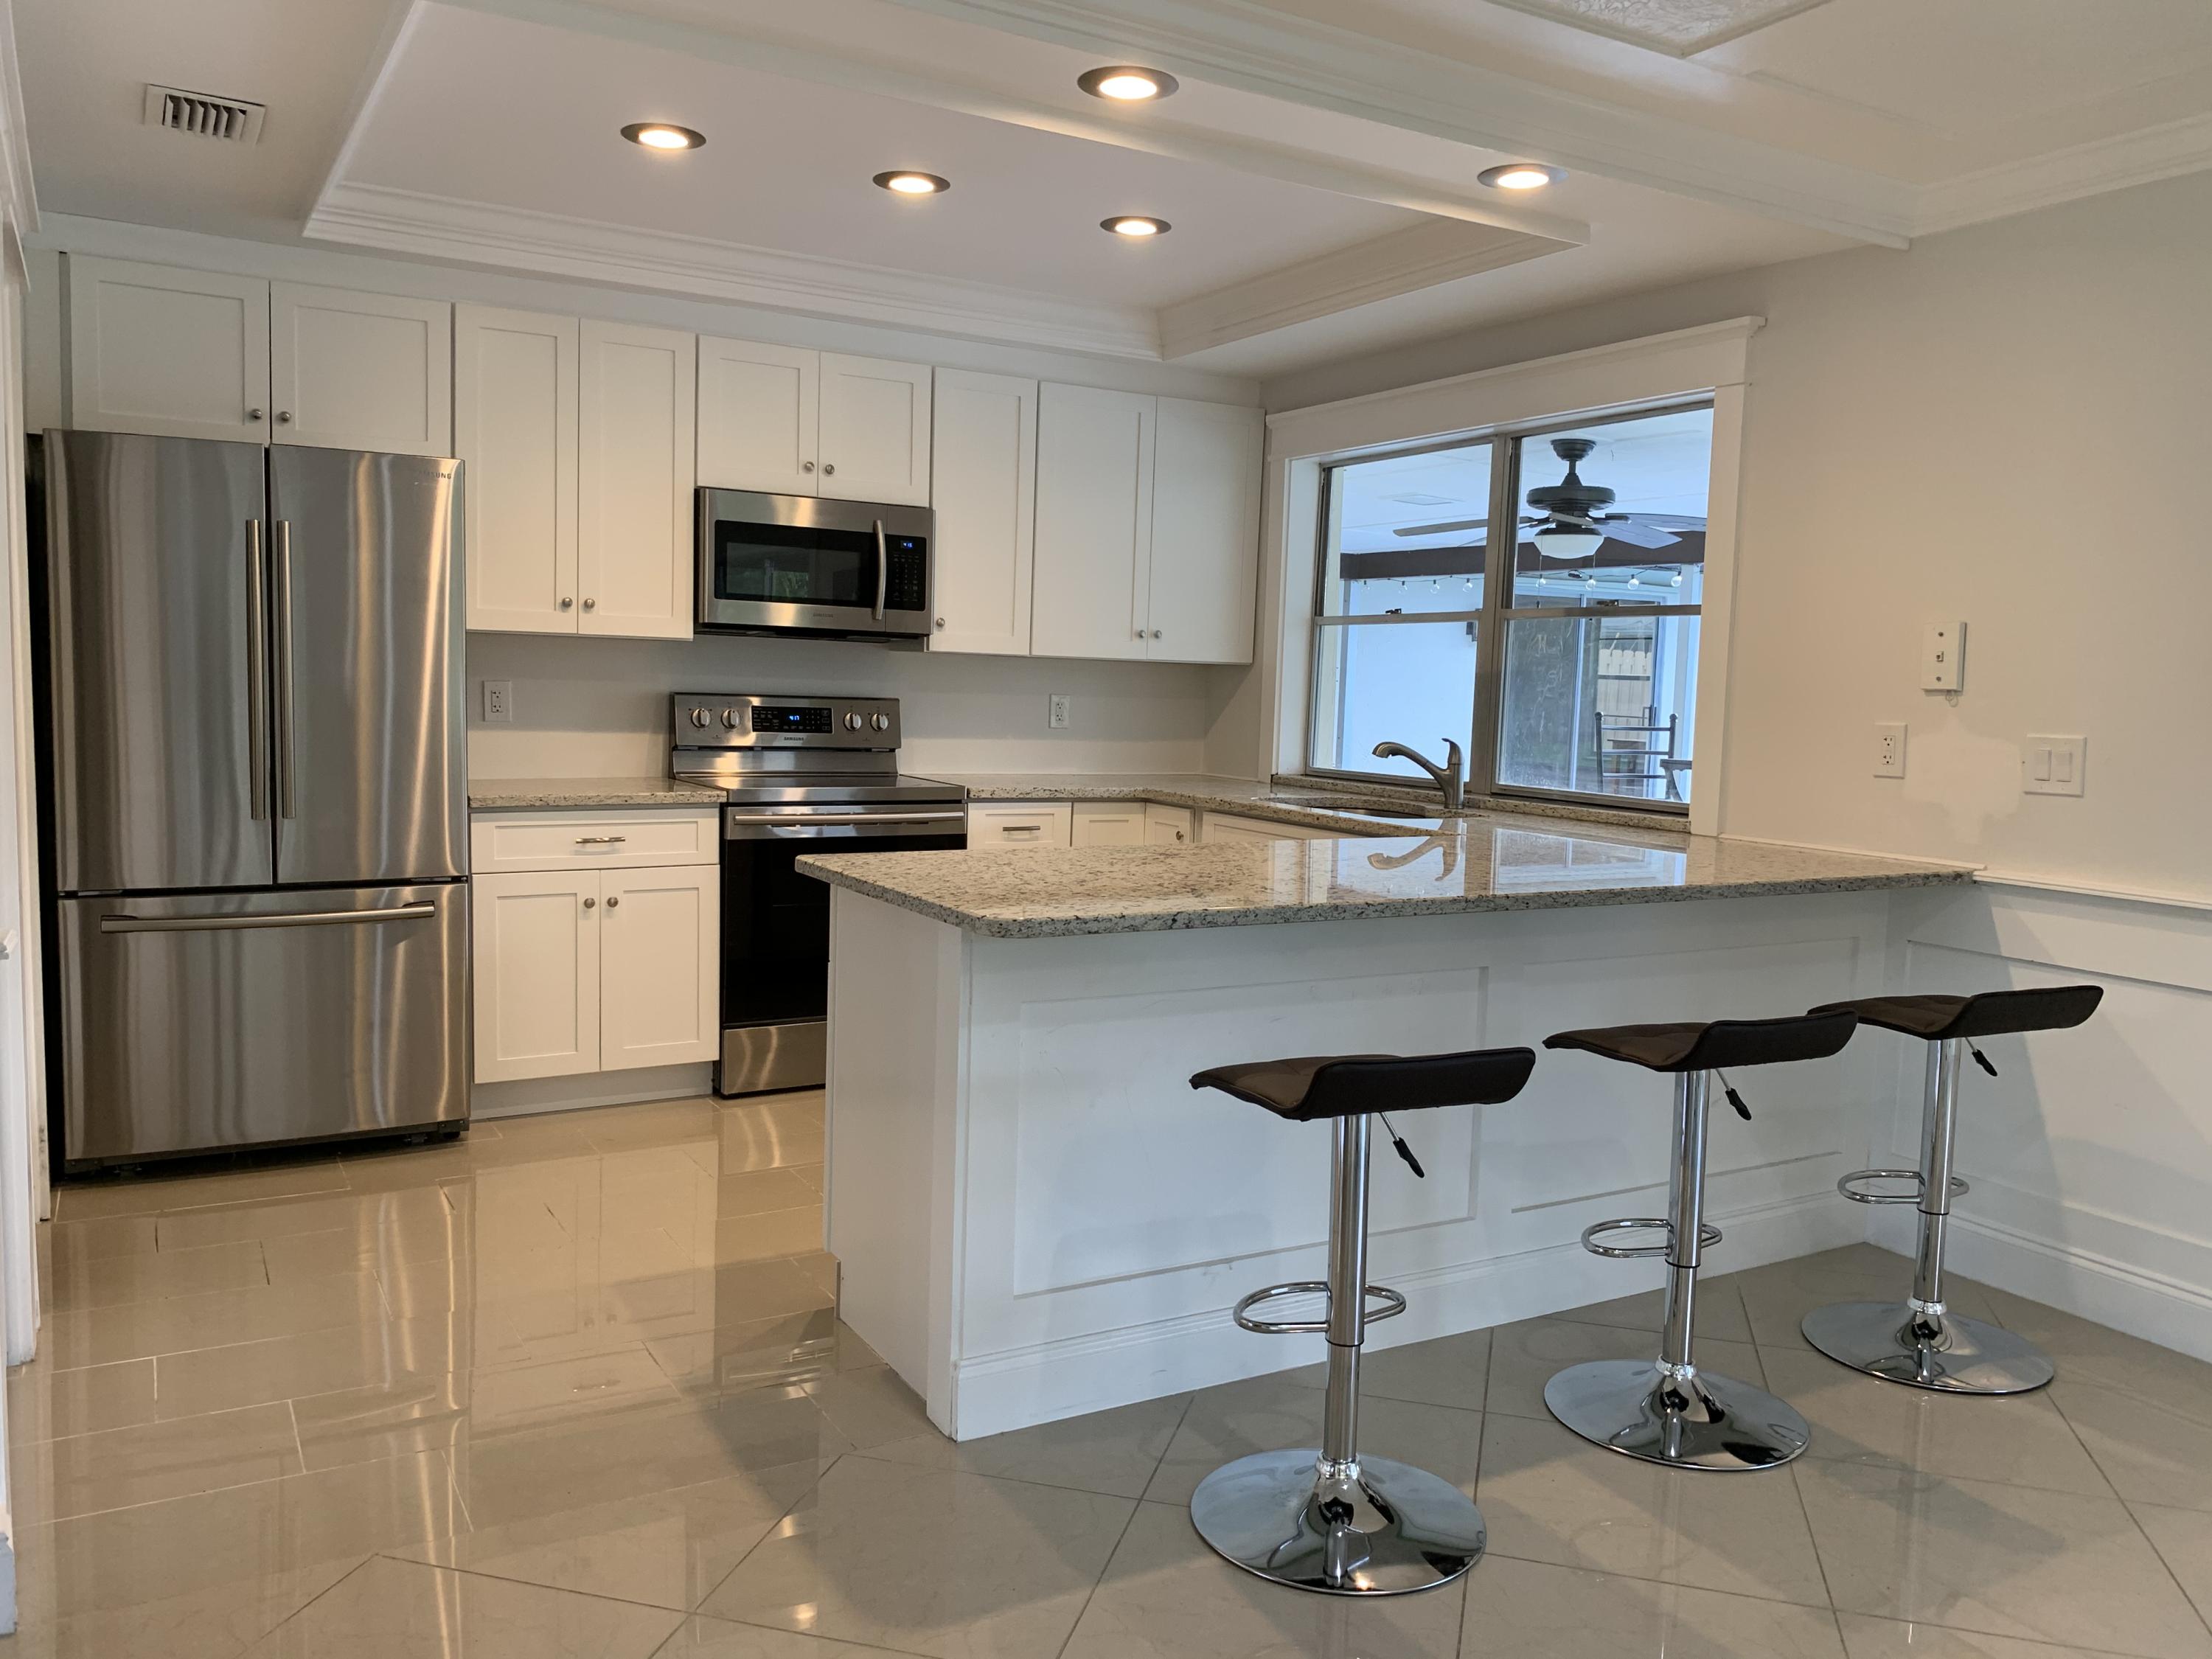 a kitchen with granite countertop a stove refrigerator and microwave